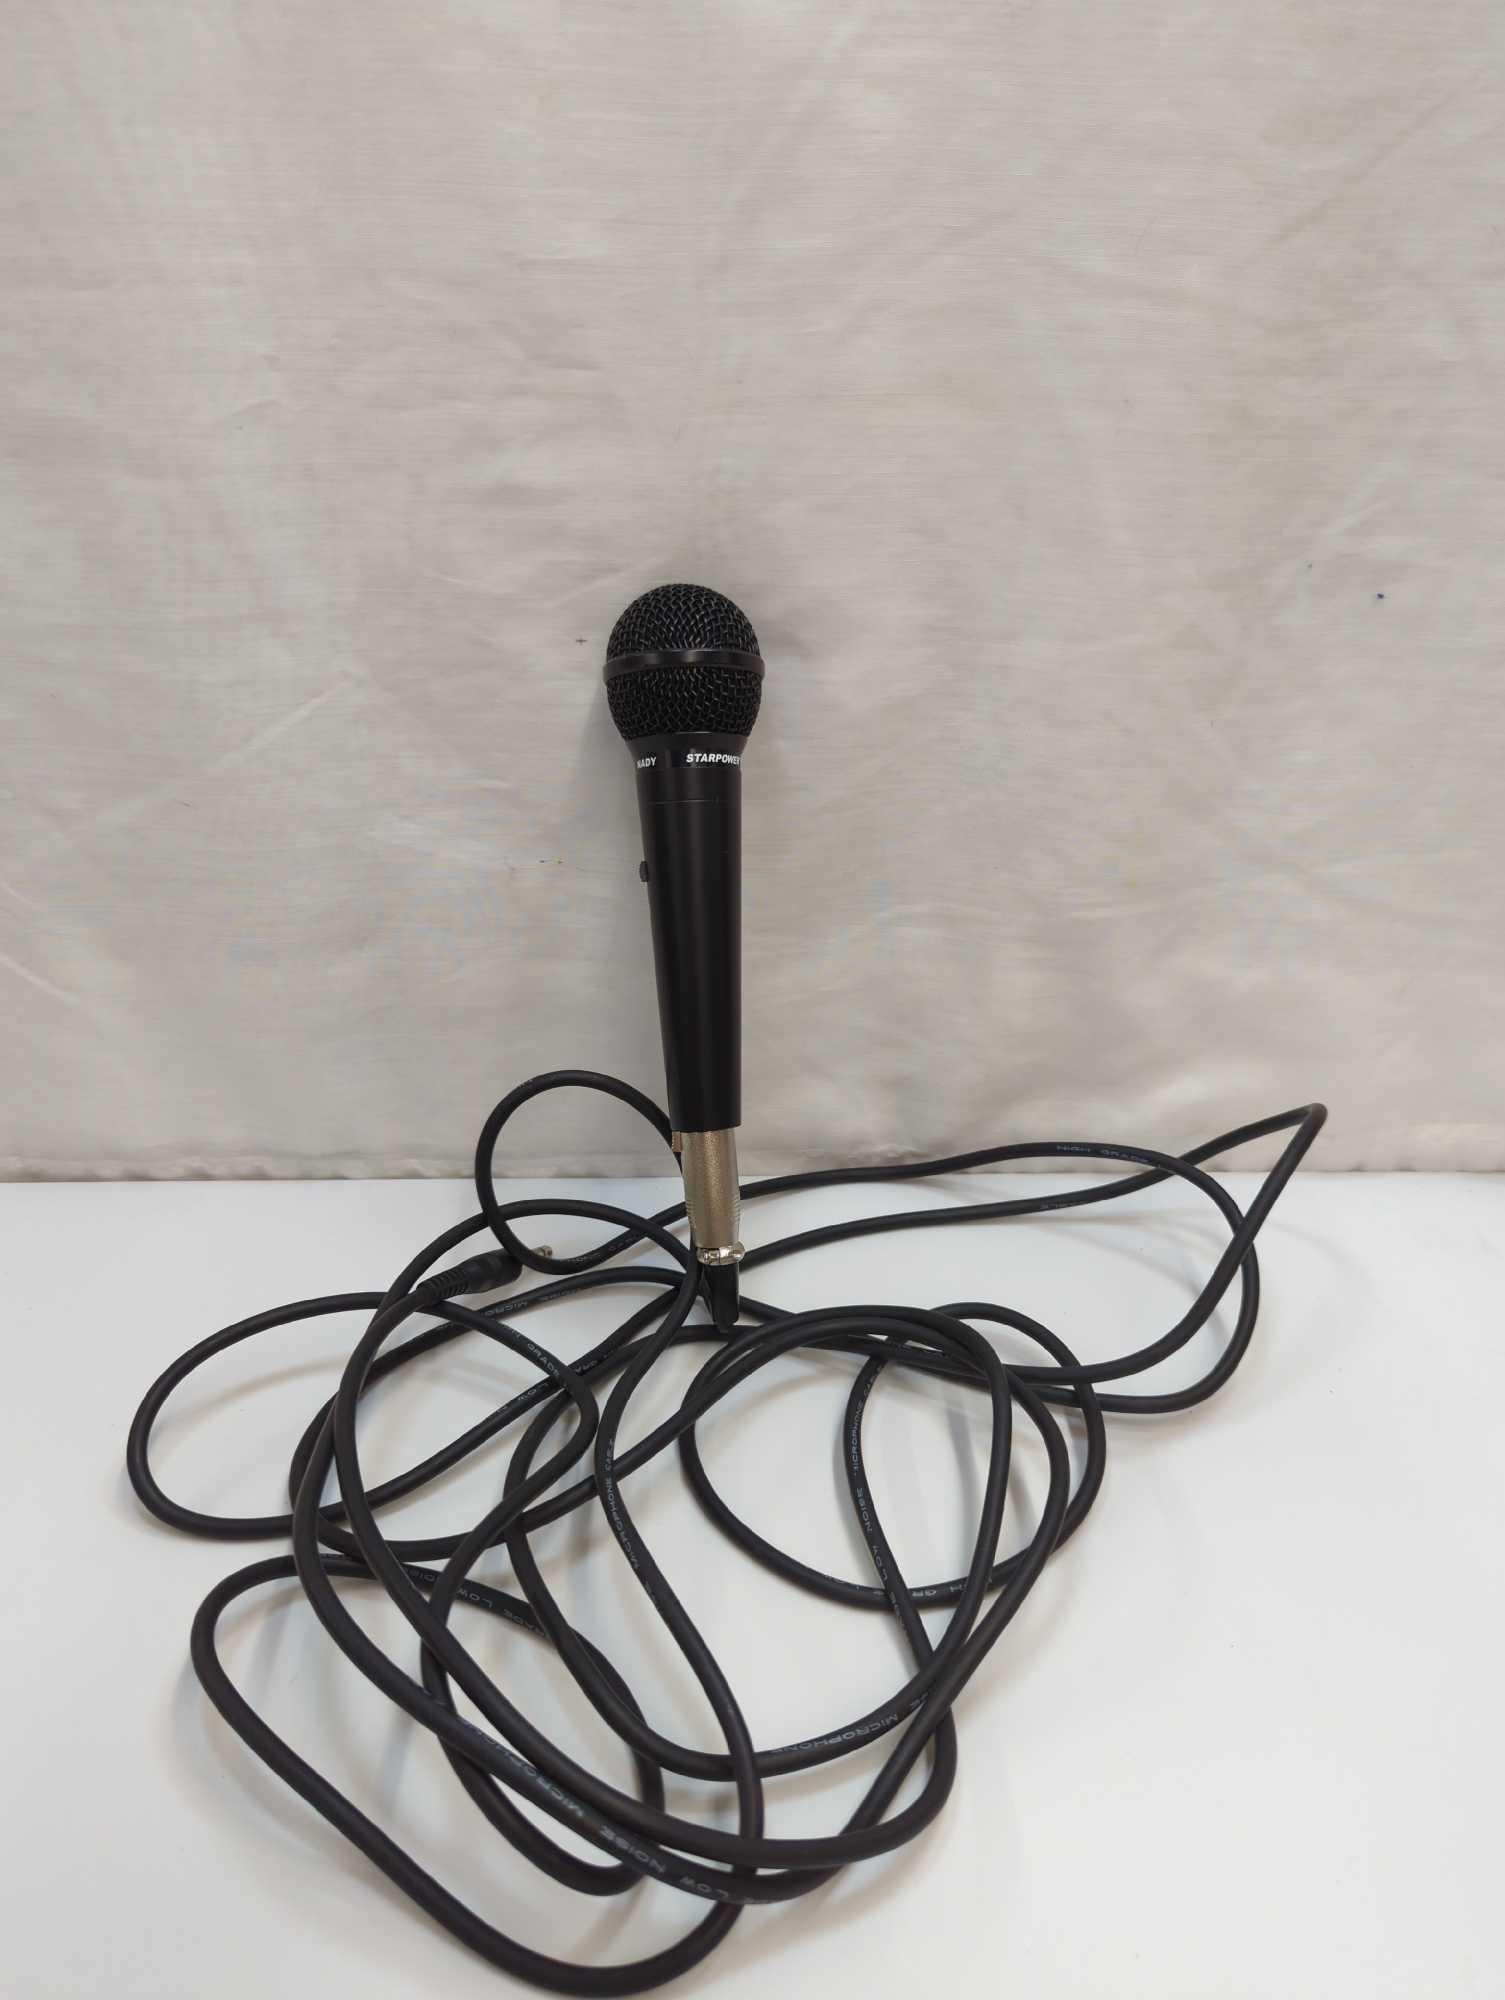 NADY STAR POWER SP -4C MICROPHONE WITH HIGH GRADE LOW NOISE CABLE WORKS